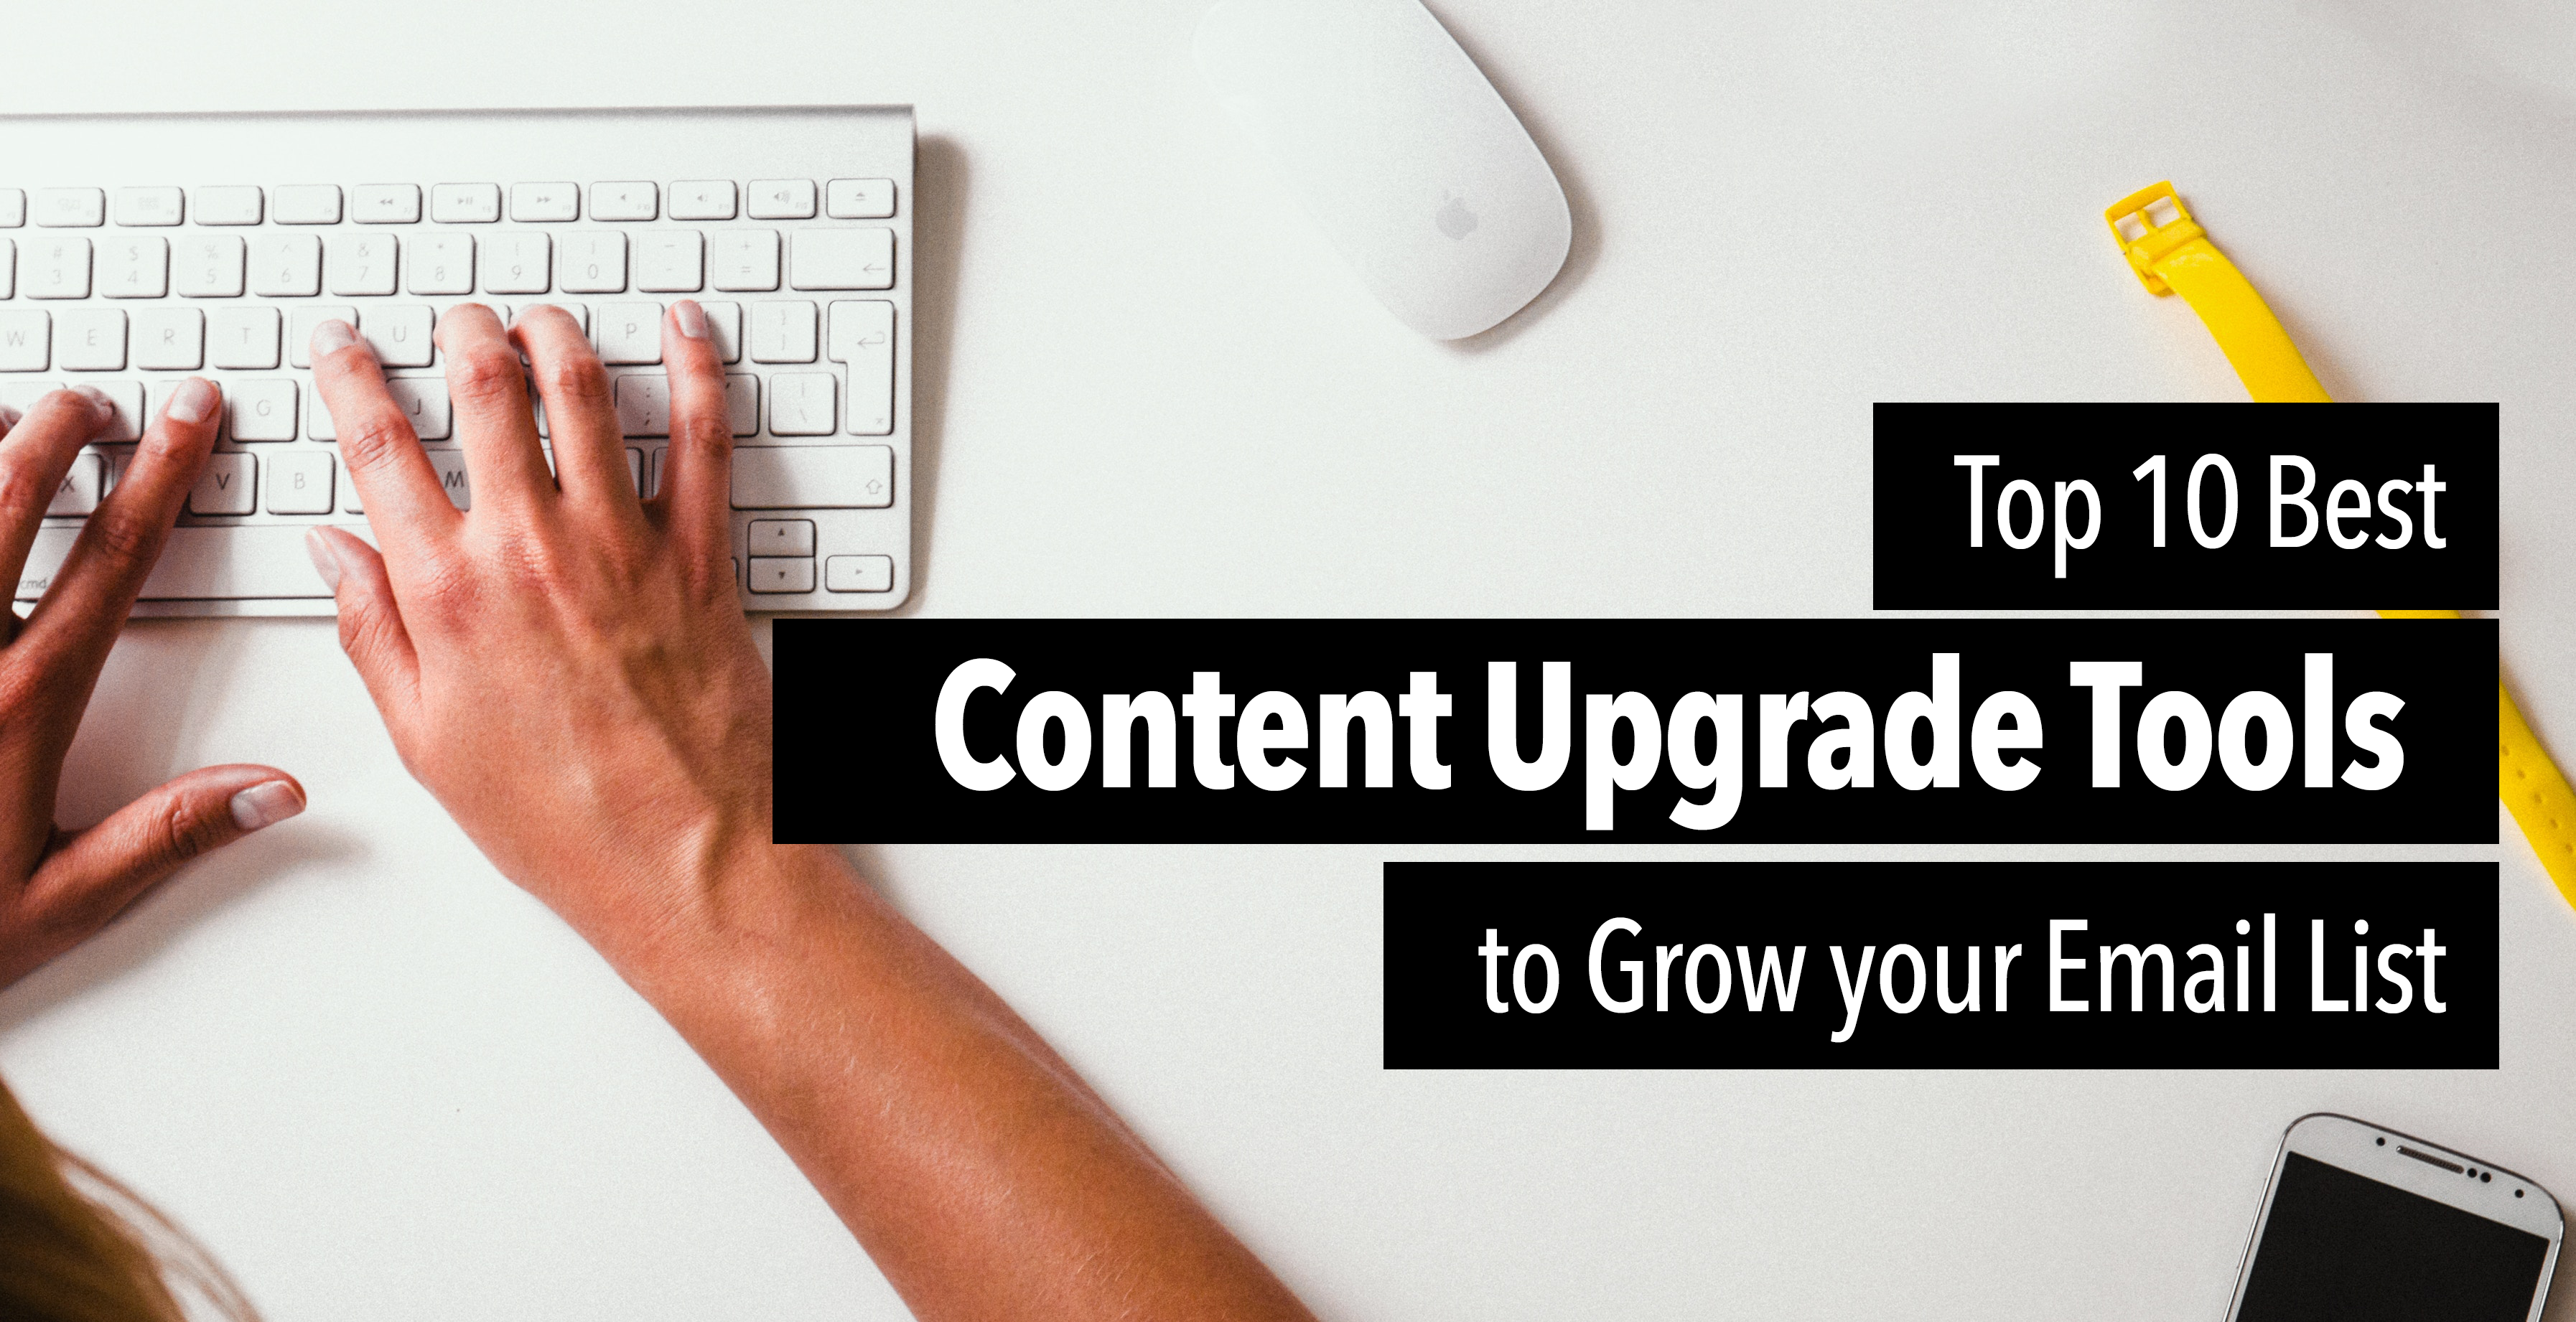 Top 10 Best Content Upgrade Tools to Grow your Email List